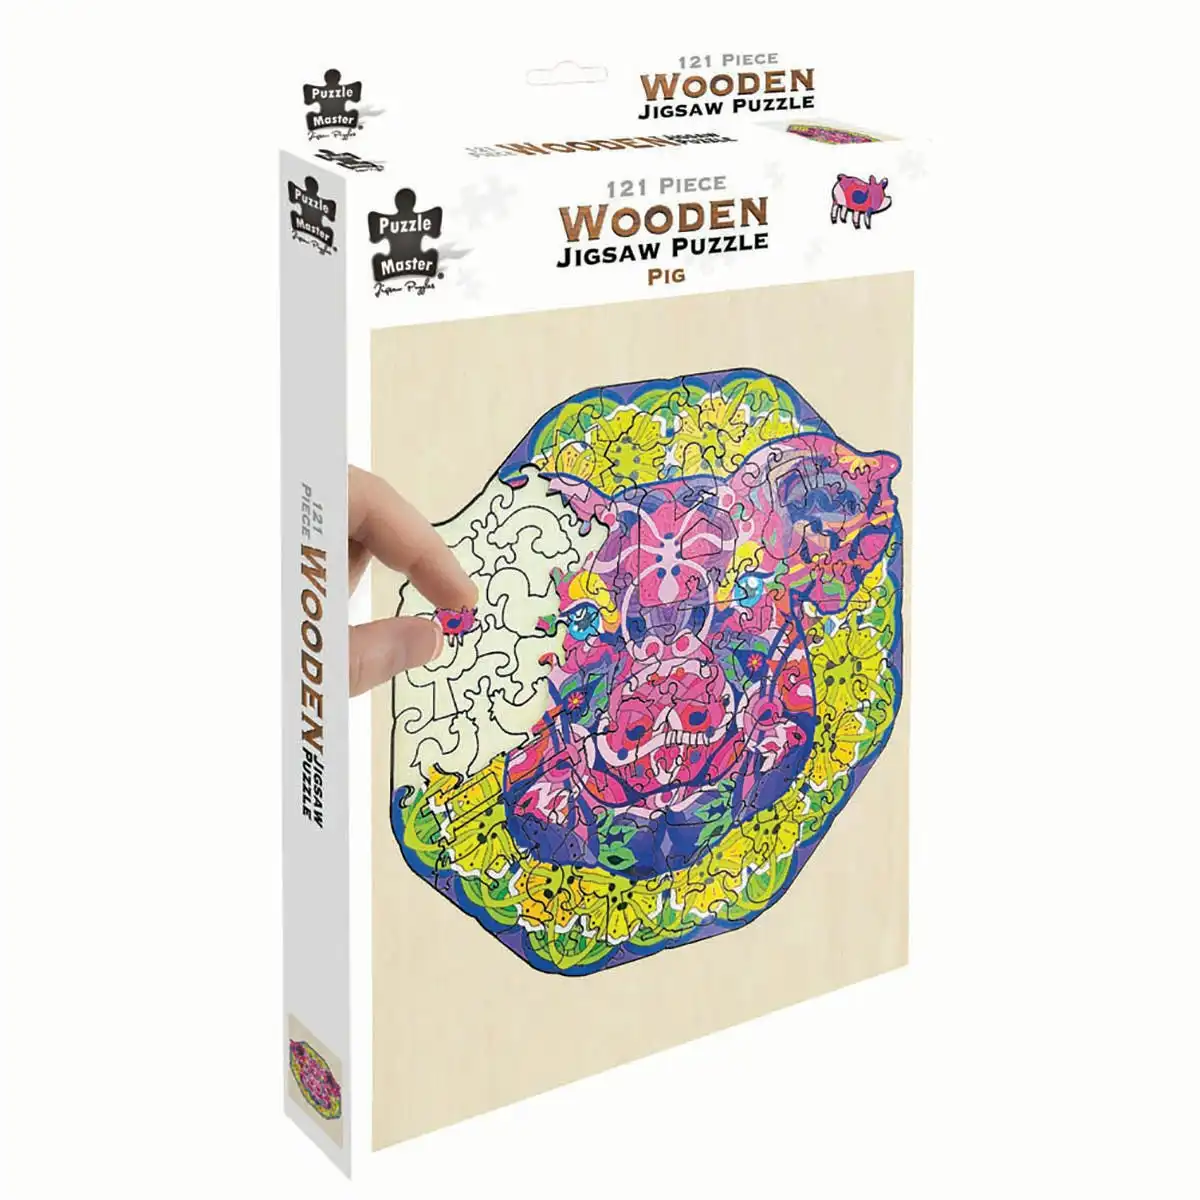 Puzzle Master Wooden Jigsaw Puzzle, Pig- 121pc